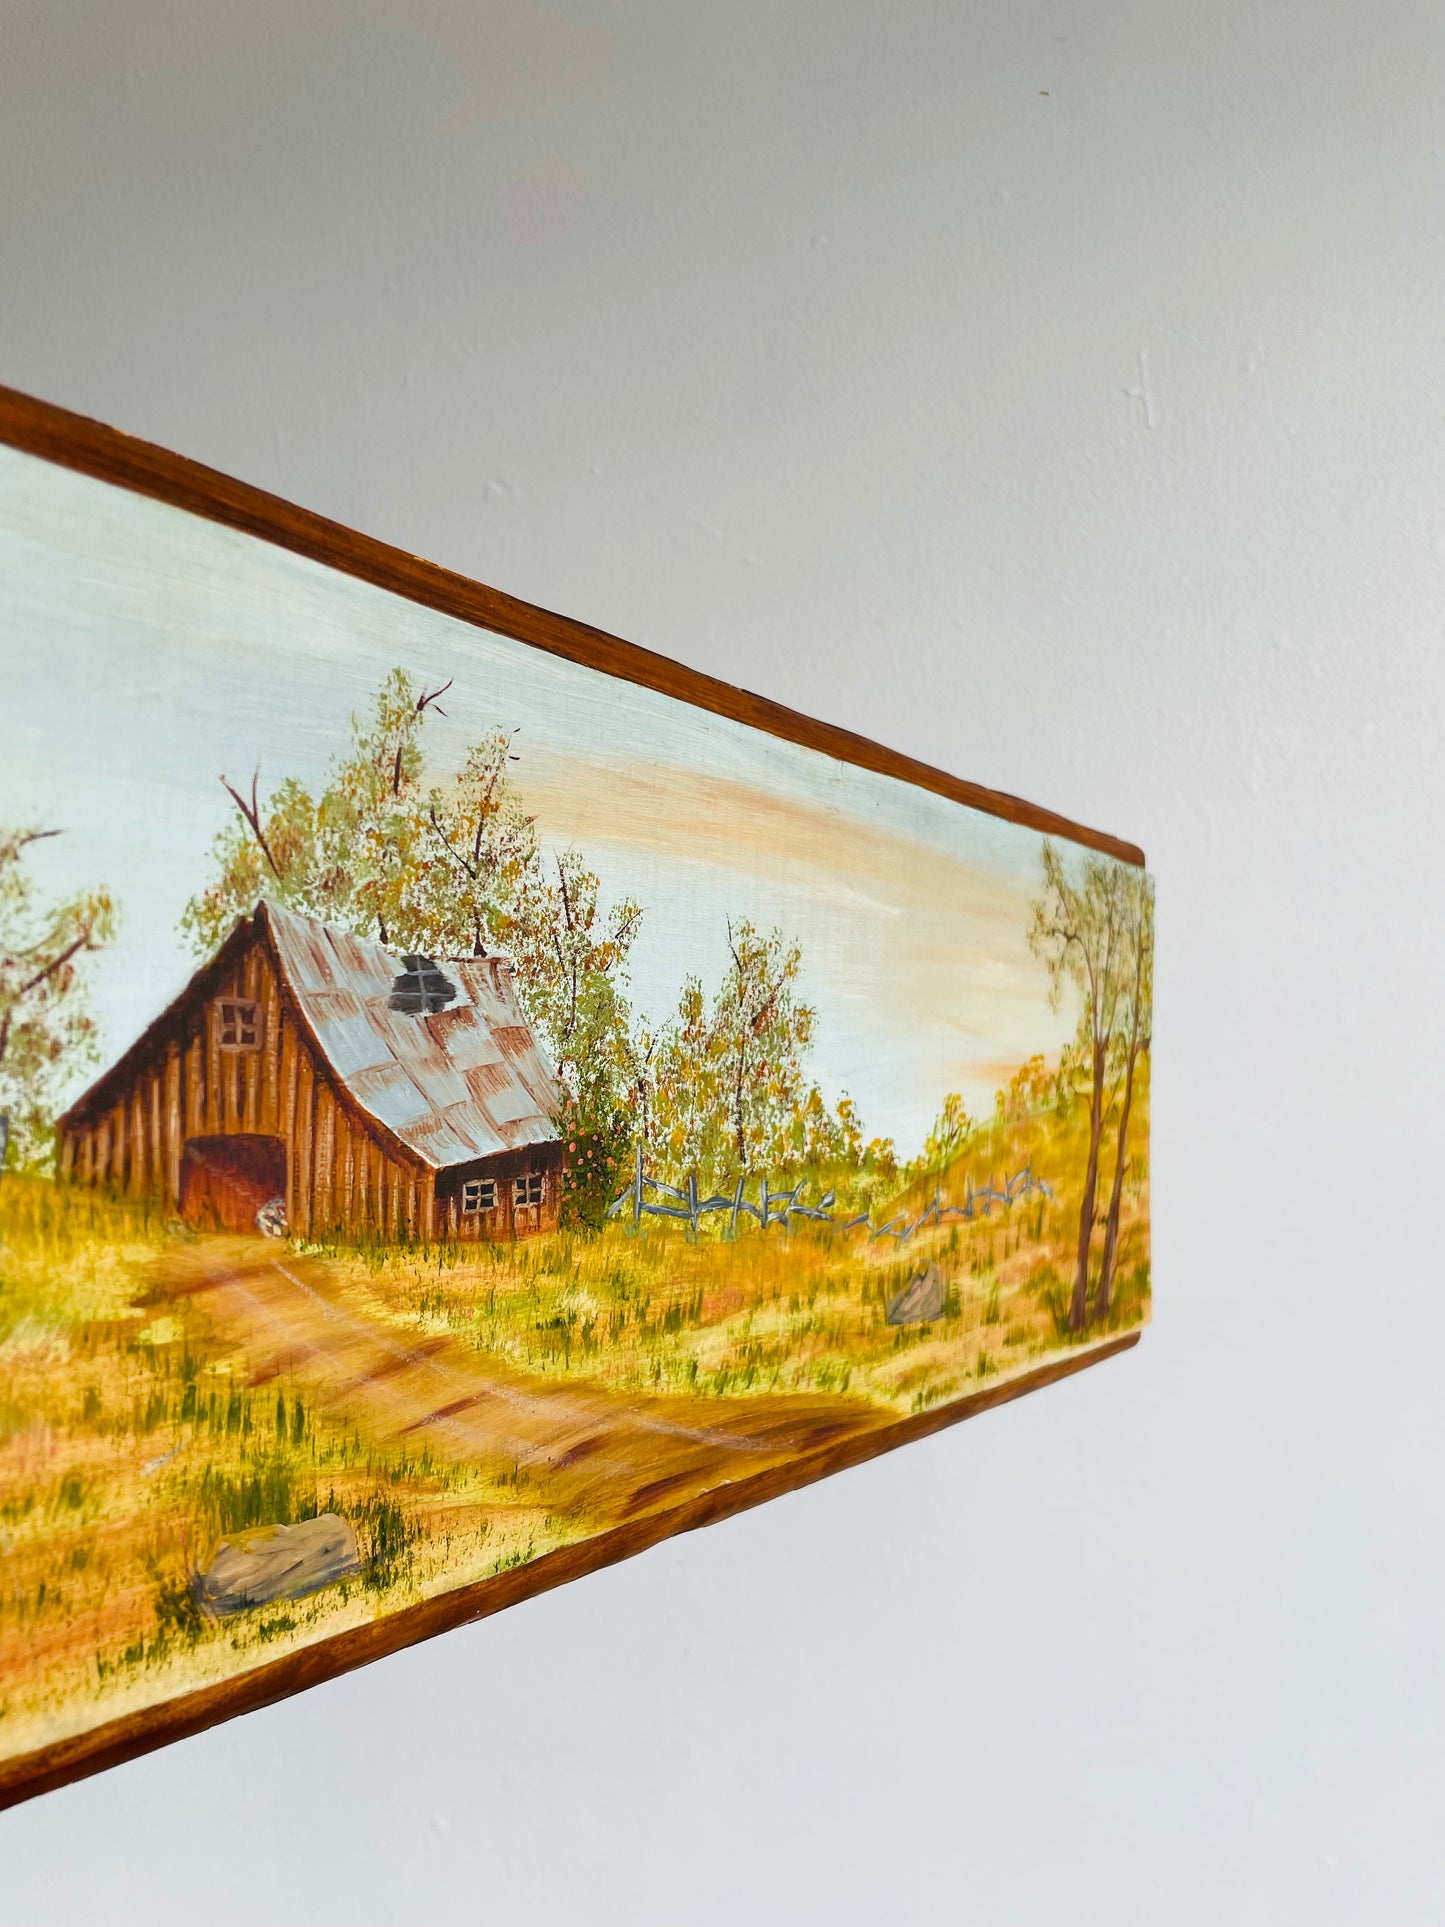 Original Art - Painting of Cabin & Nature on Wood Plank